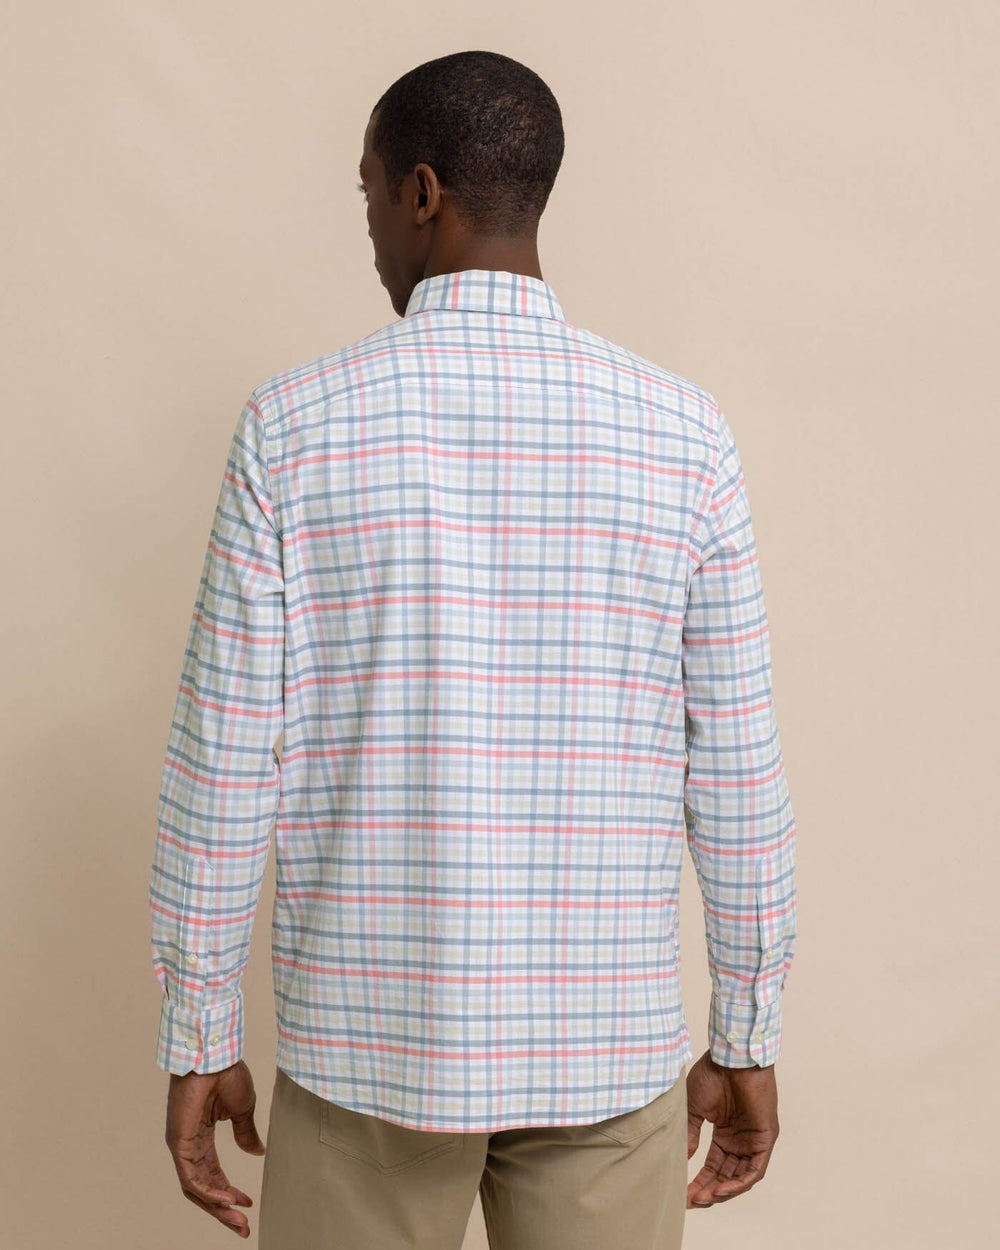 The back view of the Southern Tide Coastal Passage Pelham Gingham Long Sleeve Sport Shirt by Southern Tide - Geranium Pink